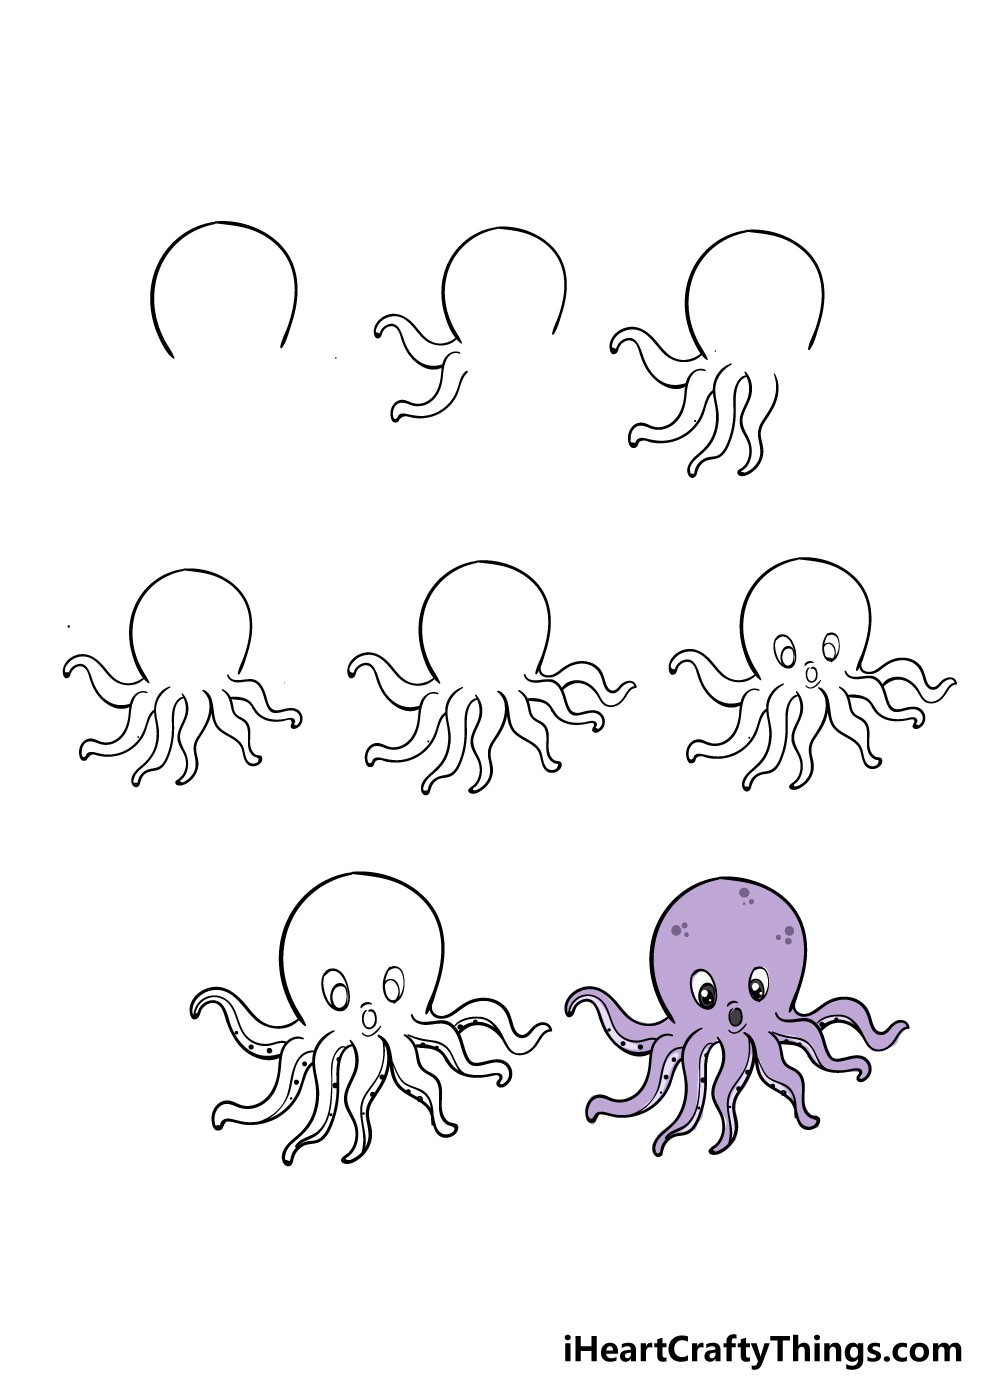 How to Draw an Octopus | An Easy Octopus Drawing - YouTube